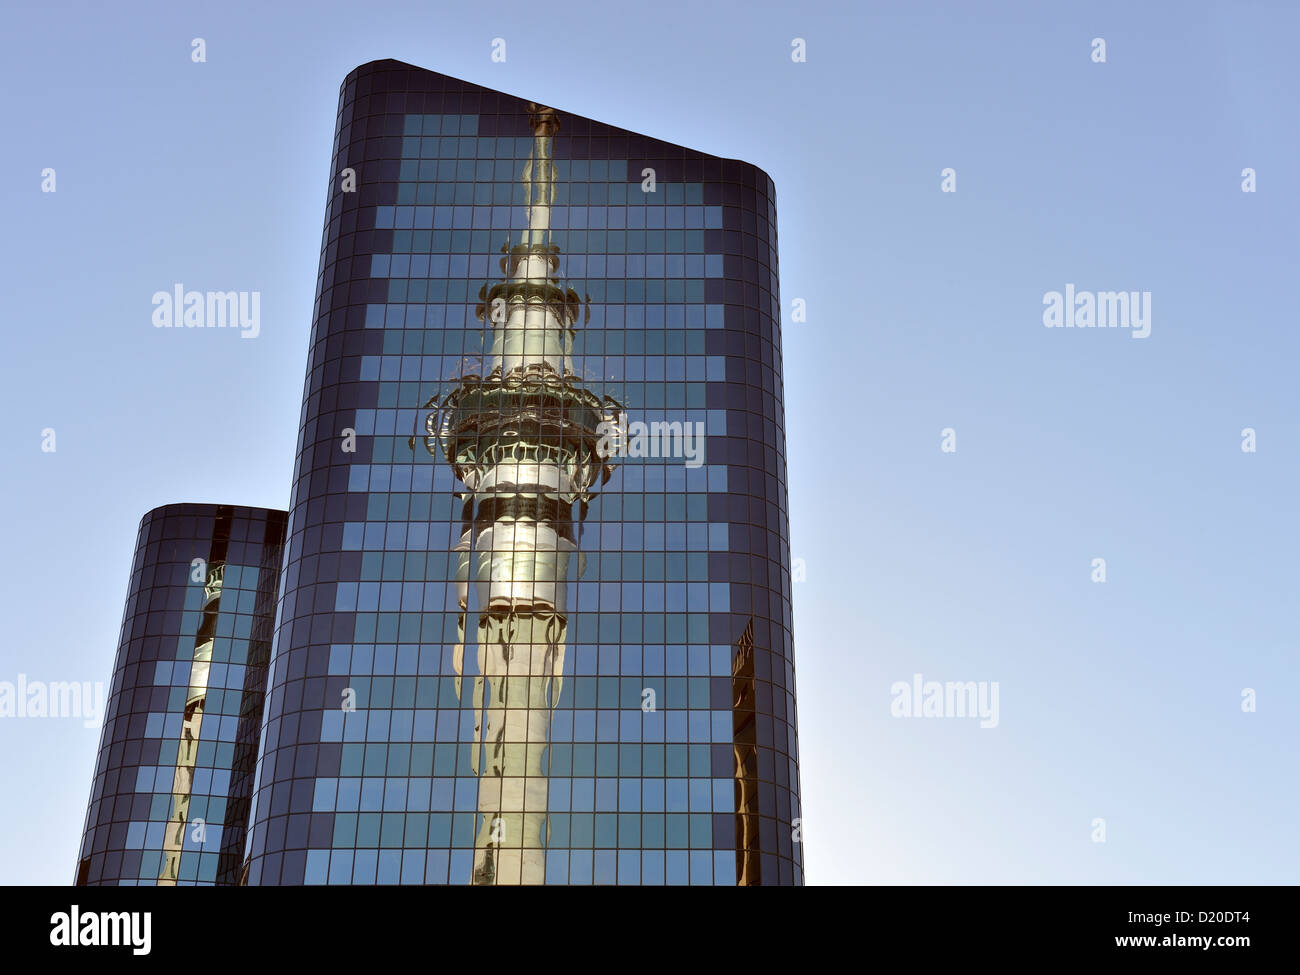 Auckland skytower reflected in adjacent glass building Stock Photo